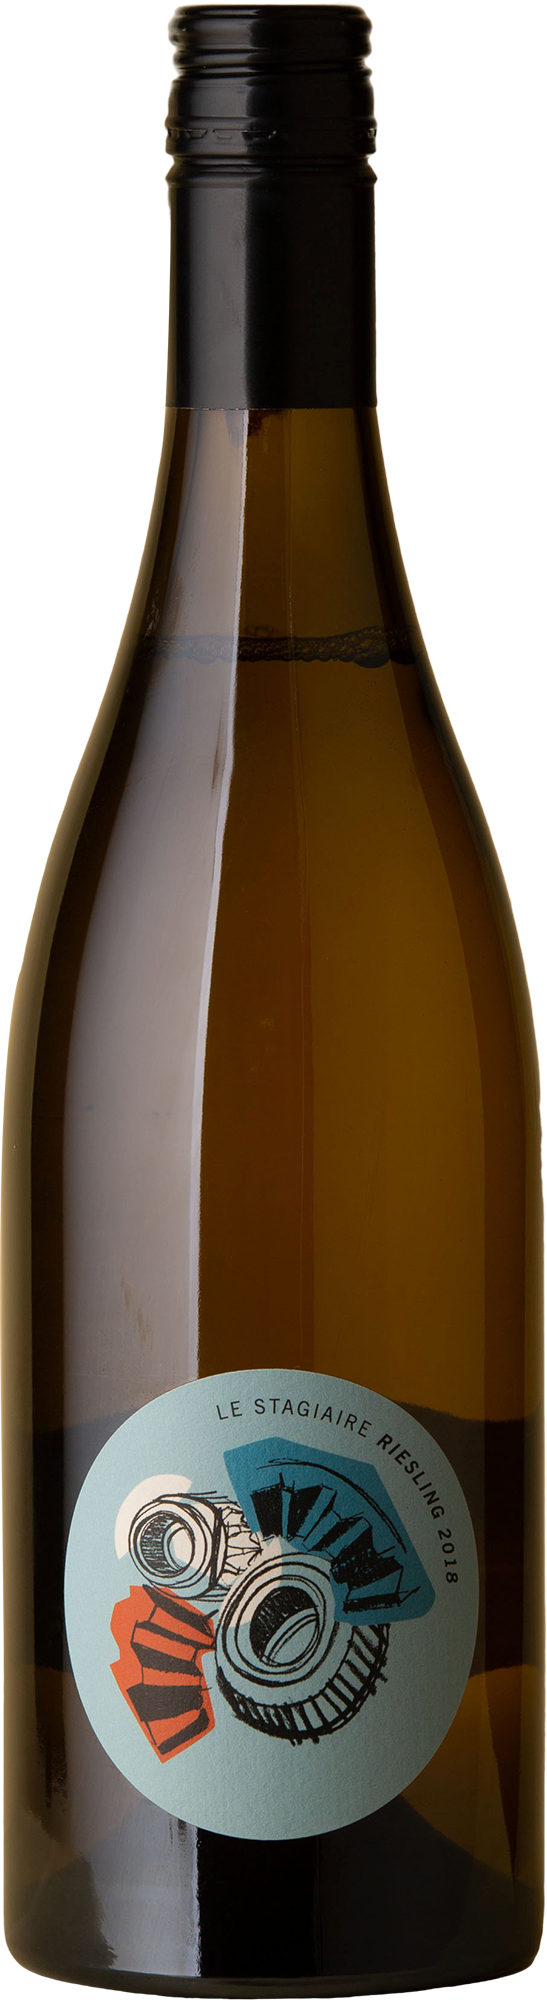 Garagiste - Le Stagiaire Riesling 2018 White Wine